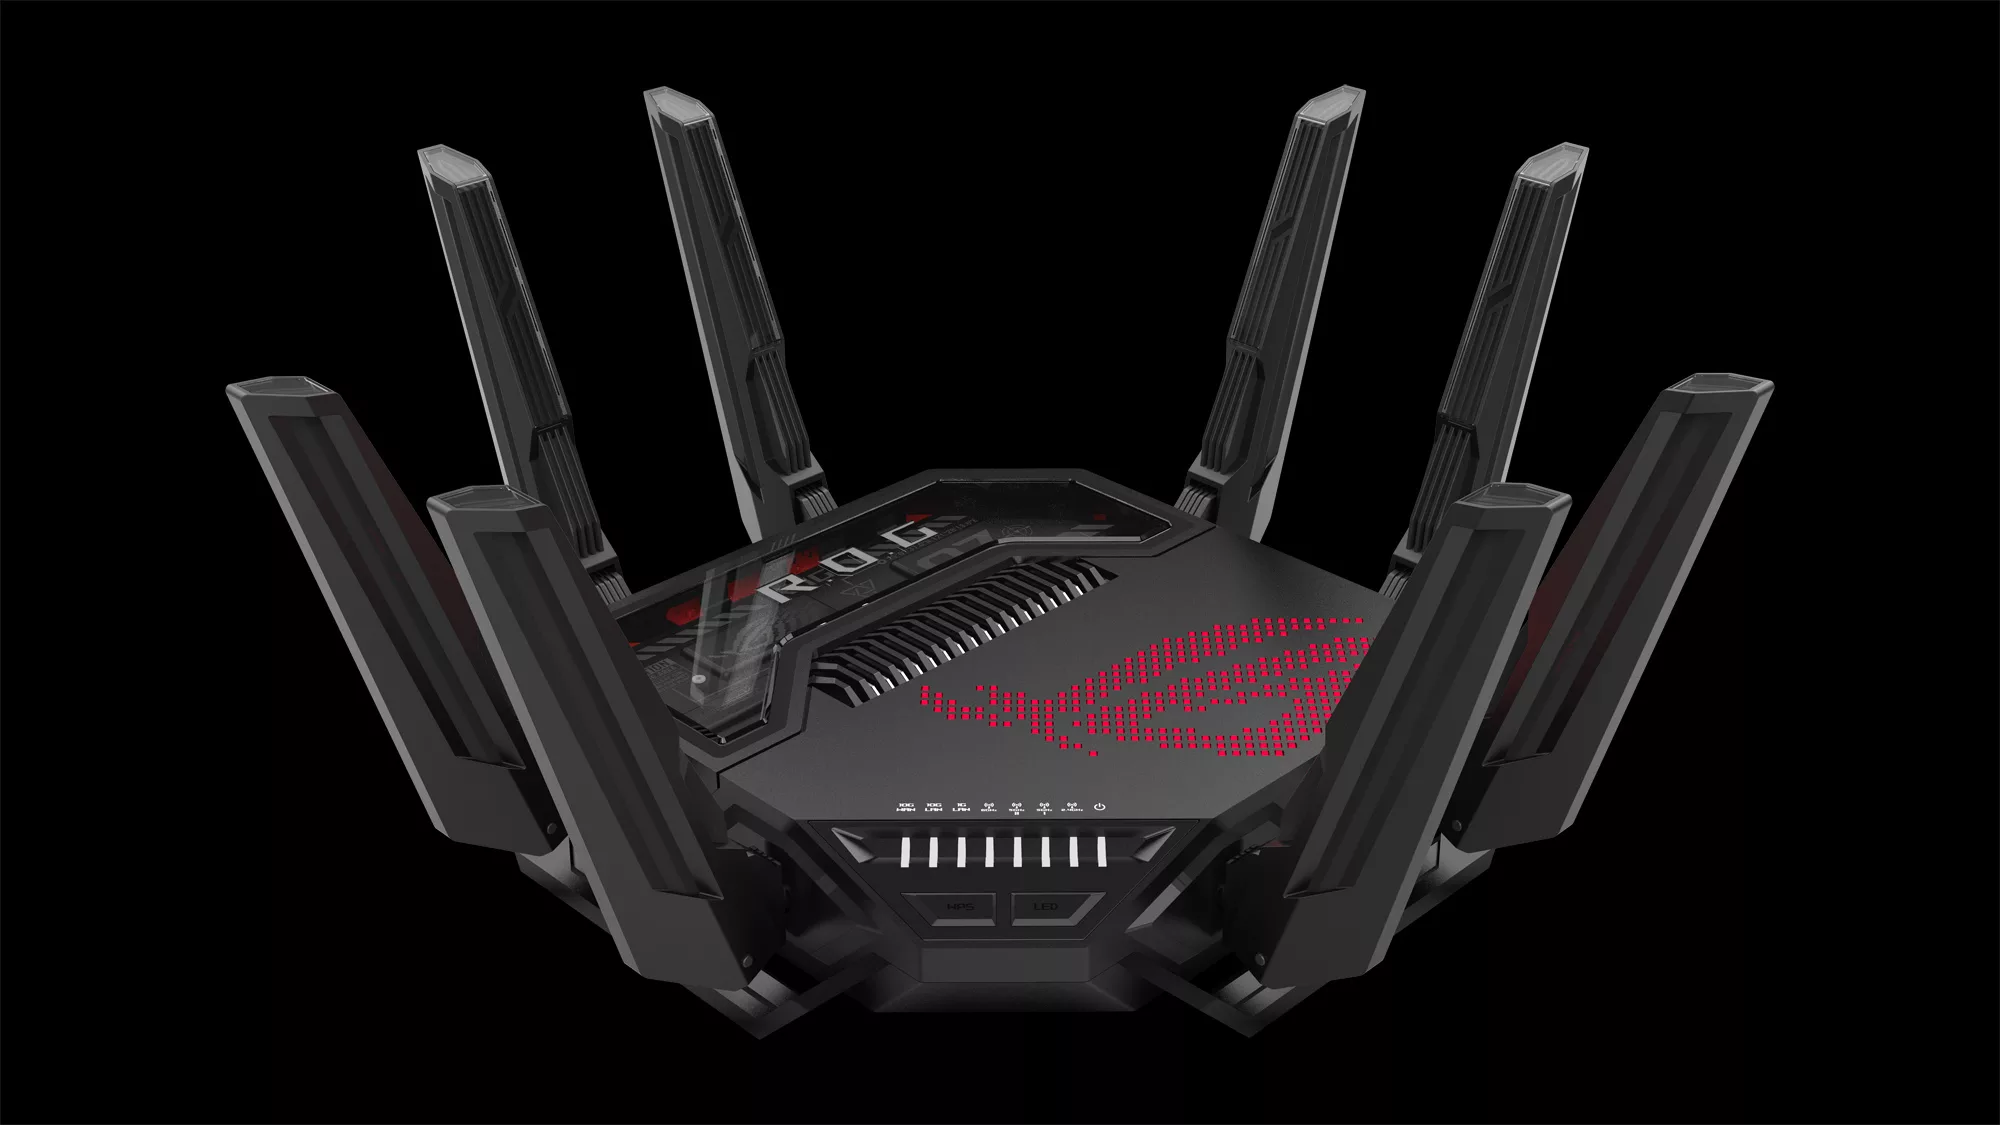 The ROG Rapture GT-BE96 gaming router on a black background.